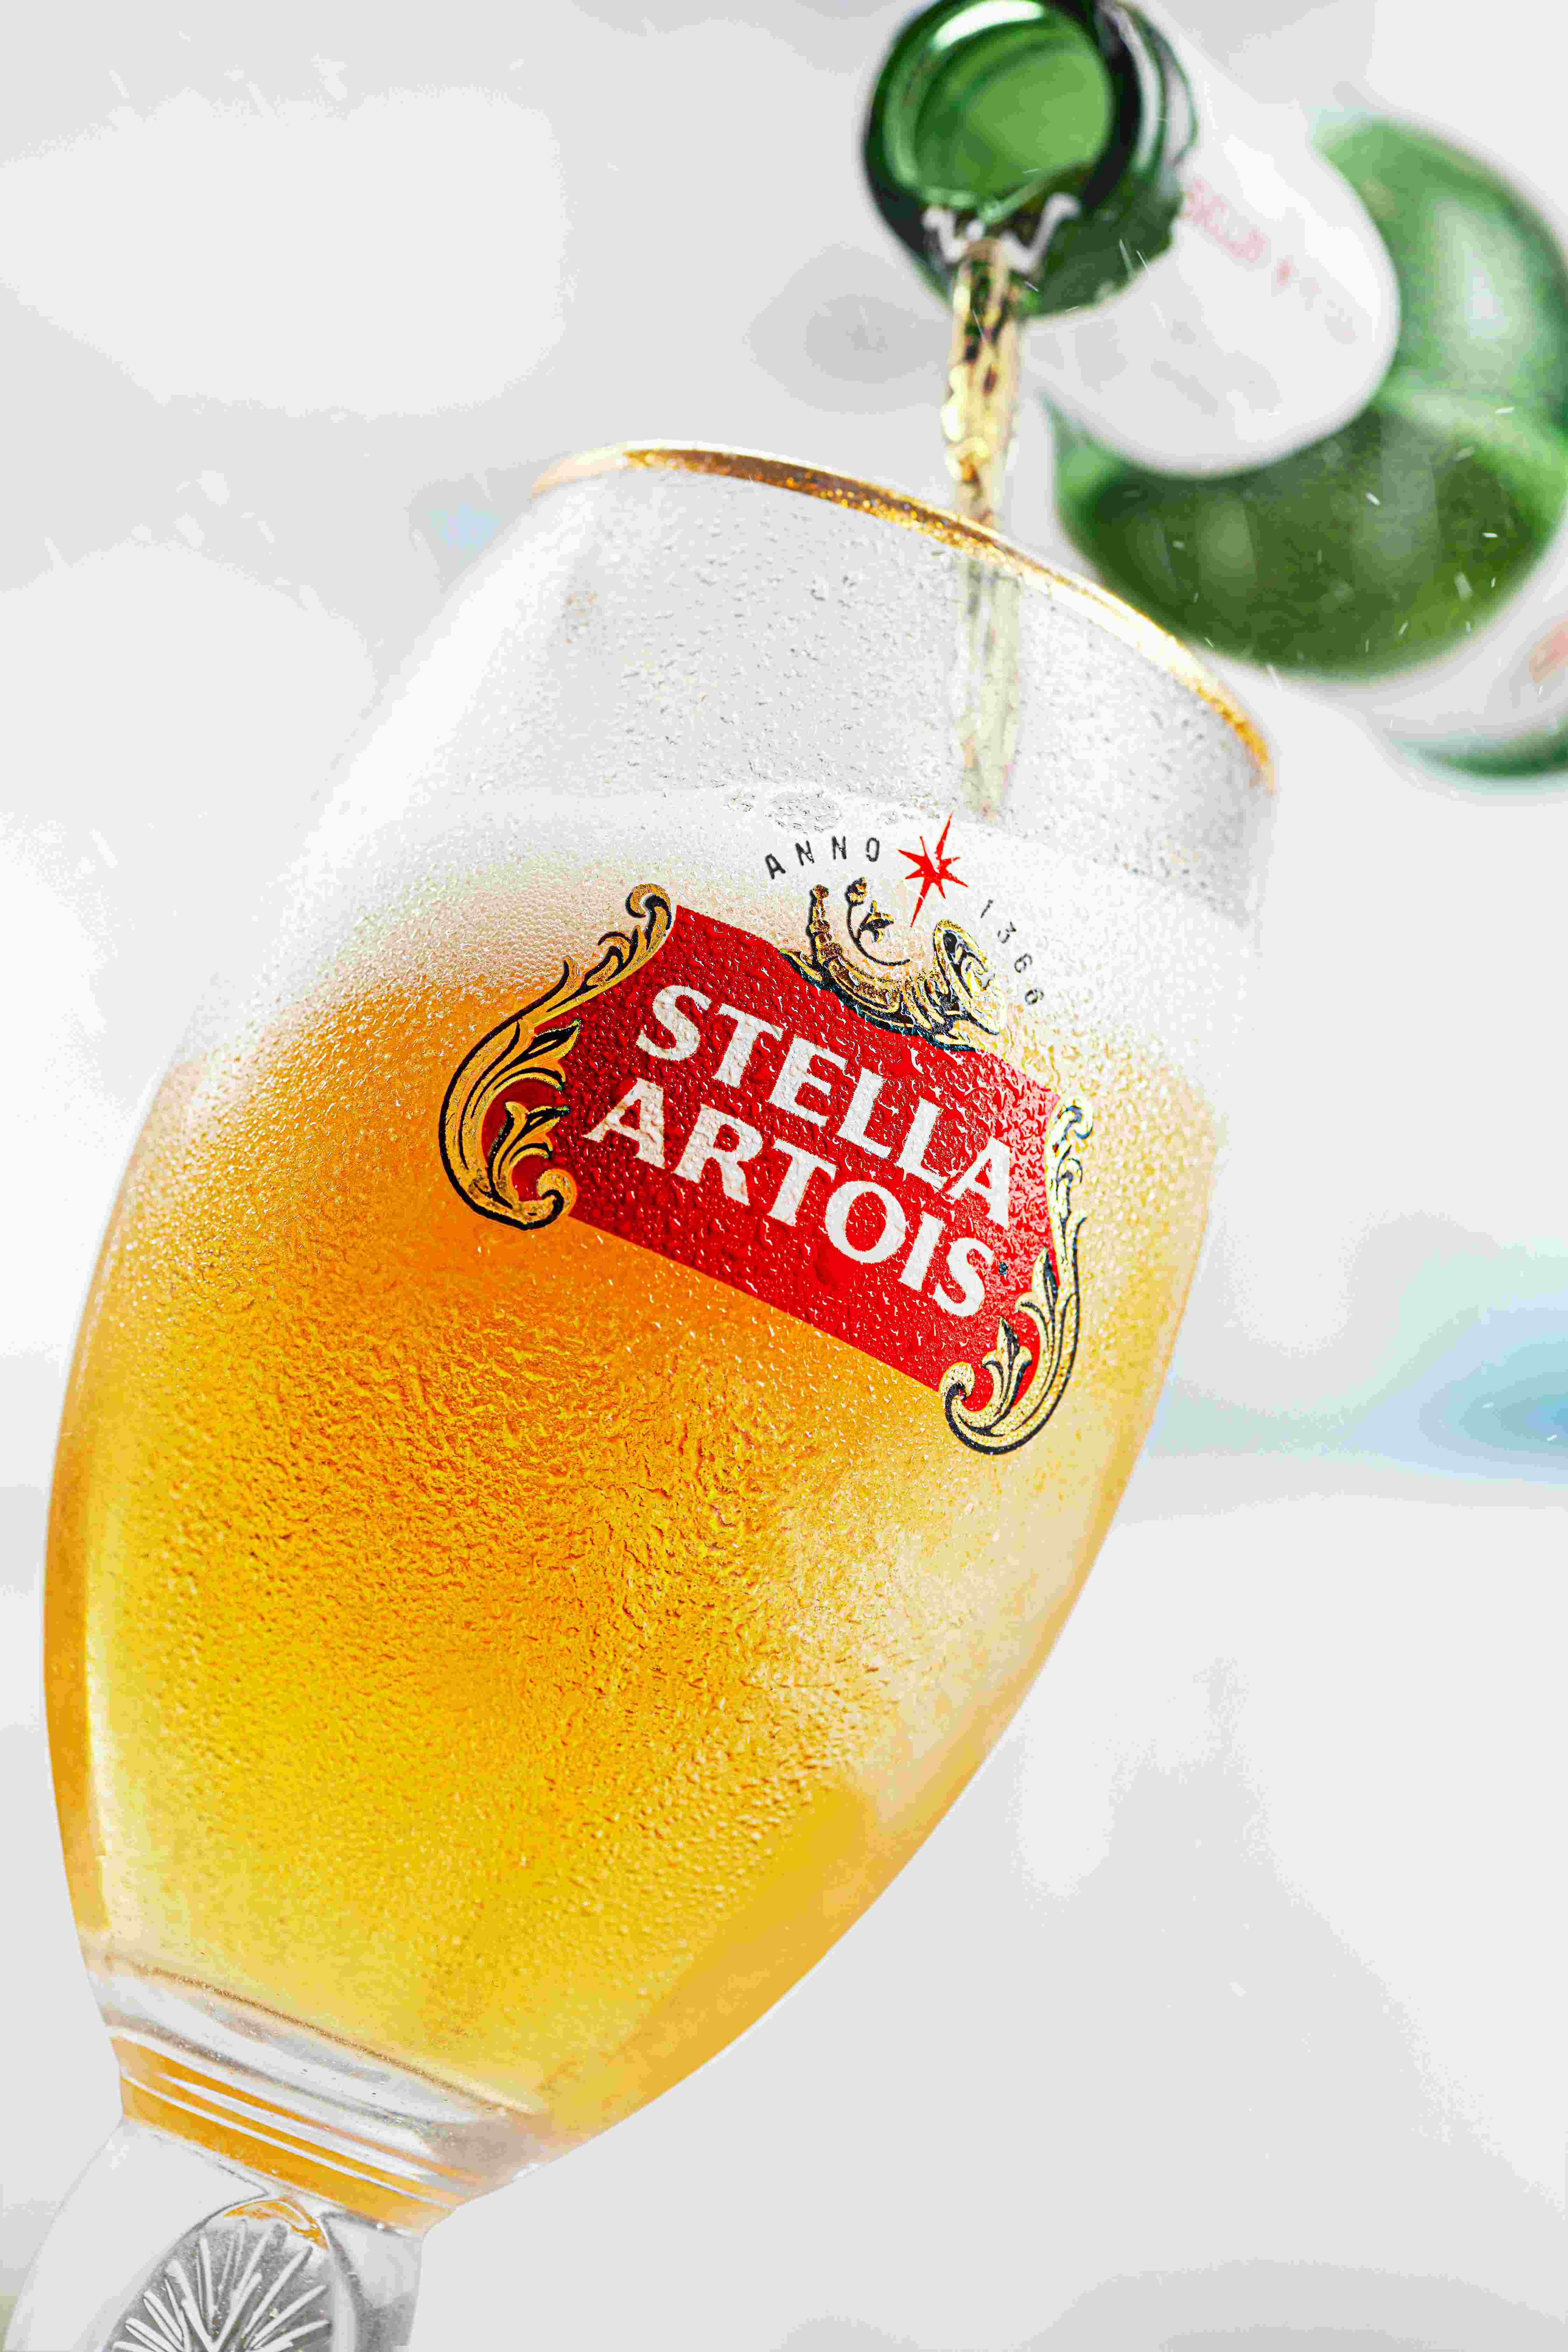 Stella Artois being poured from bottle into a pint glass